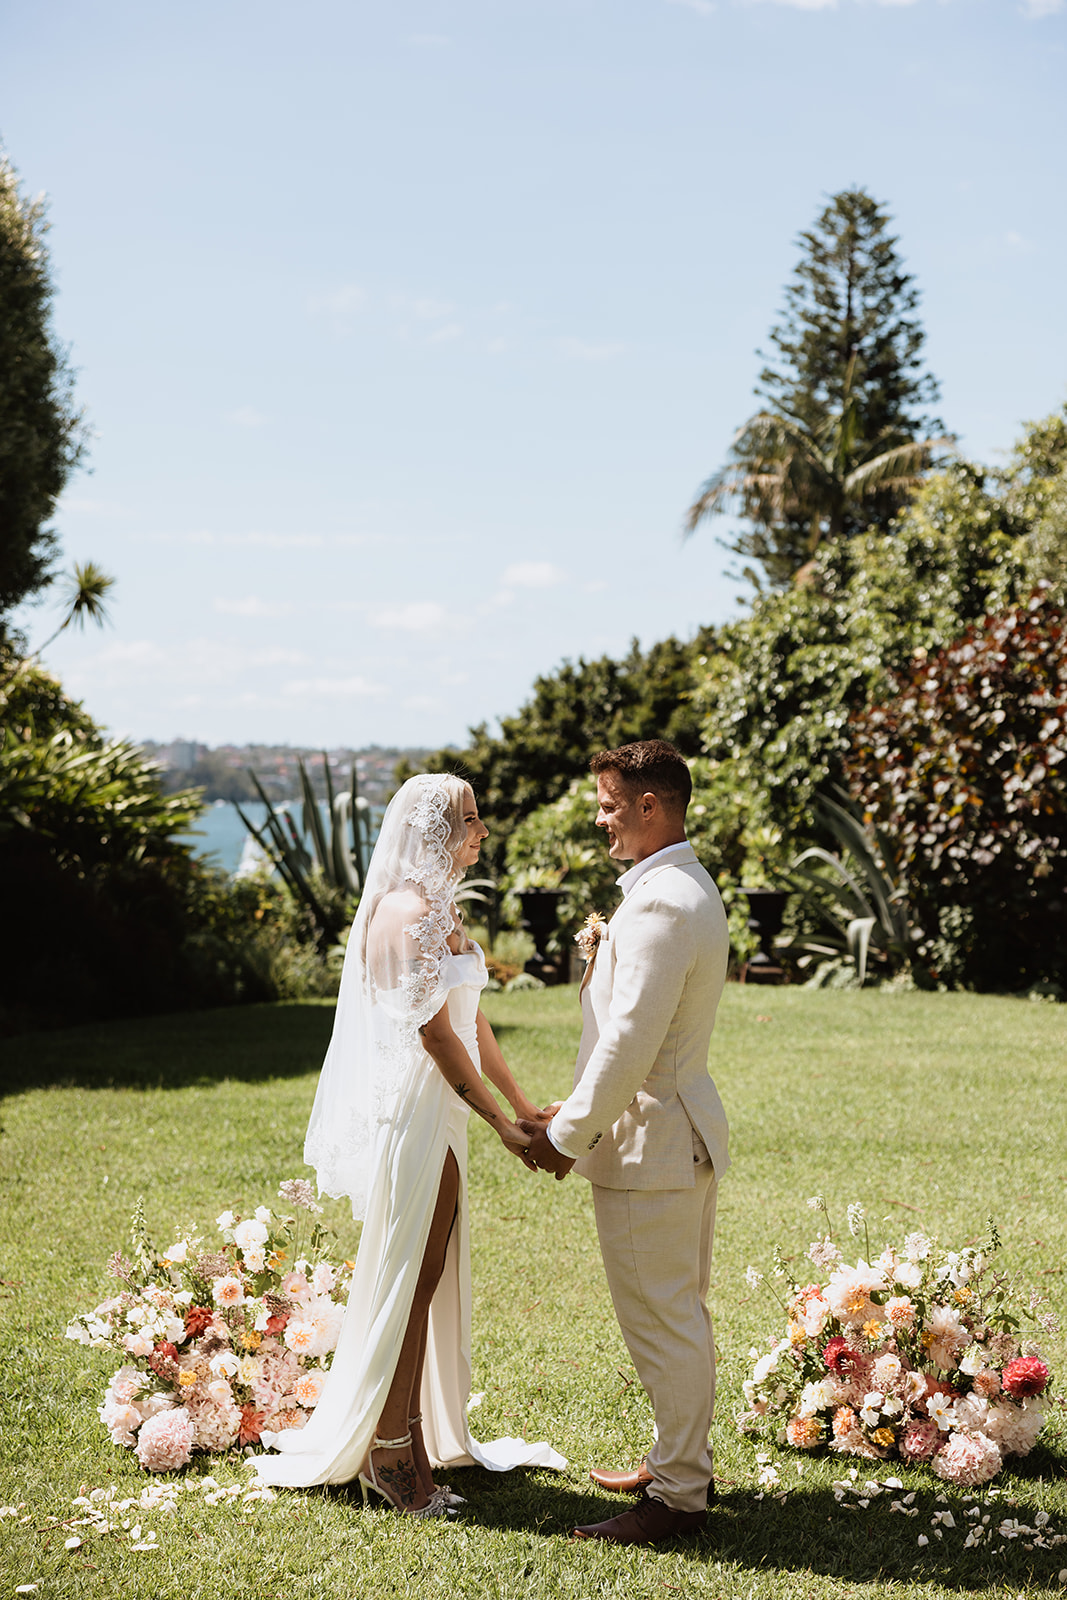 Wedding ceremony in Lindesay House, Darling Point New South Wales